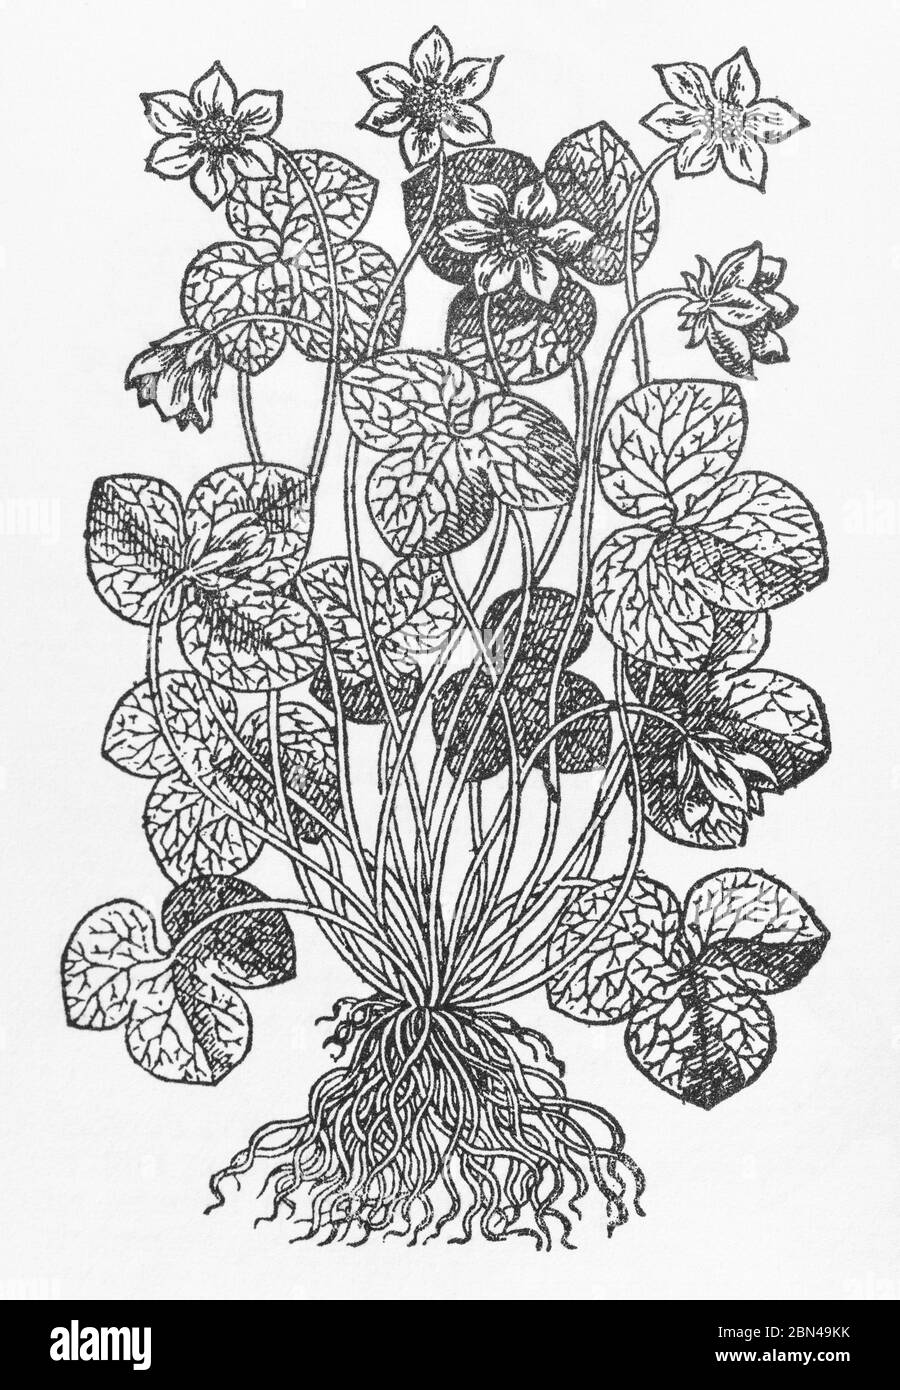 Noble Liverwort / Hepatica triloba plant woodcut from Gerarde's Herball, History of Plants. He refers to it as Hepatica trifolia rubra. P1032 Stock Photo